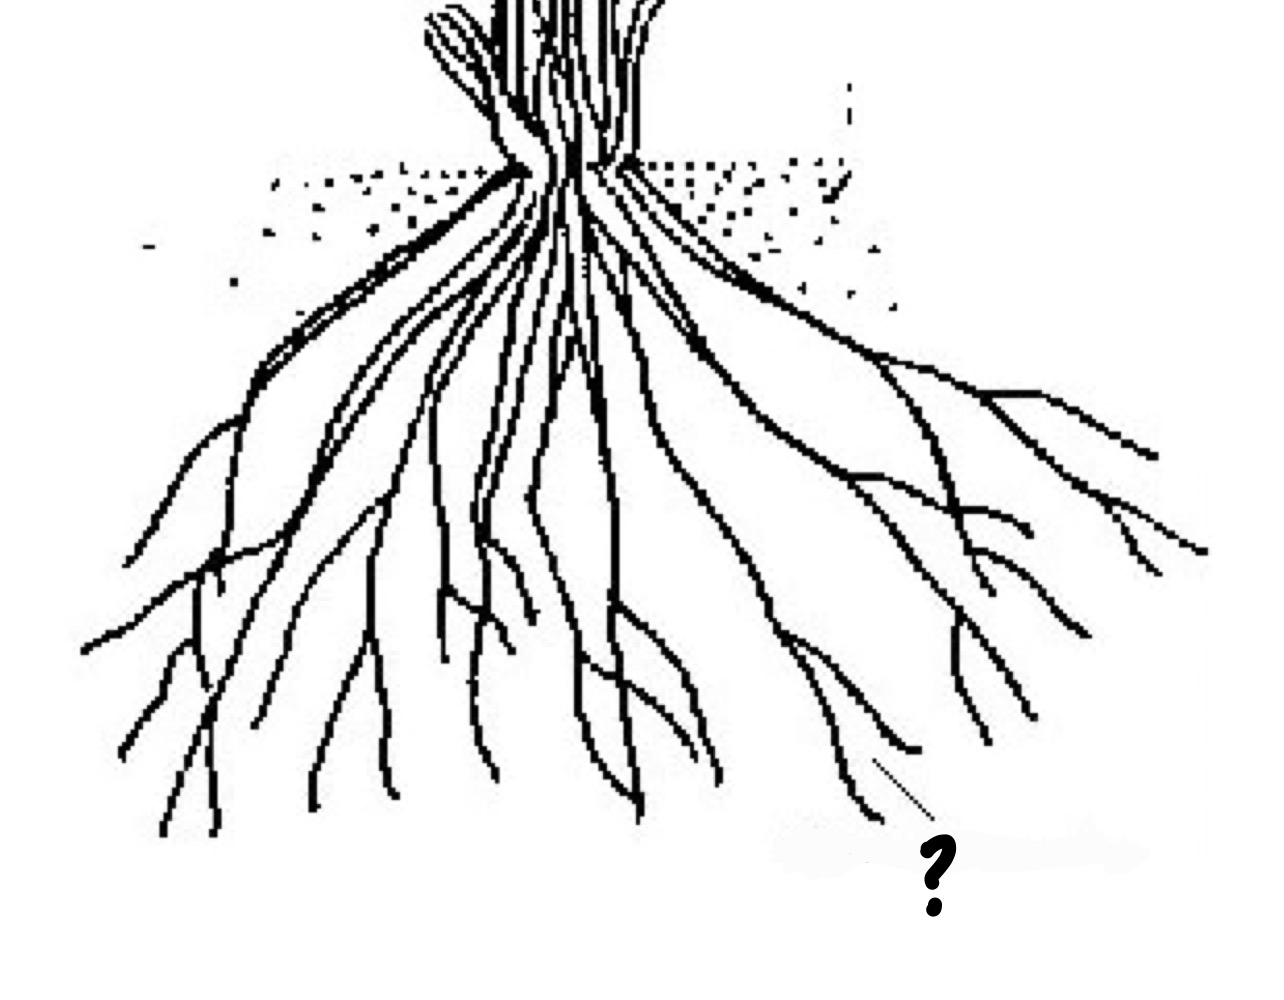 <ul><li><p>characterized by thin lateral roots with no main roots</p></li><li><p>what monocots and seedless vascular plants have</p></li></ul>